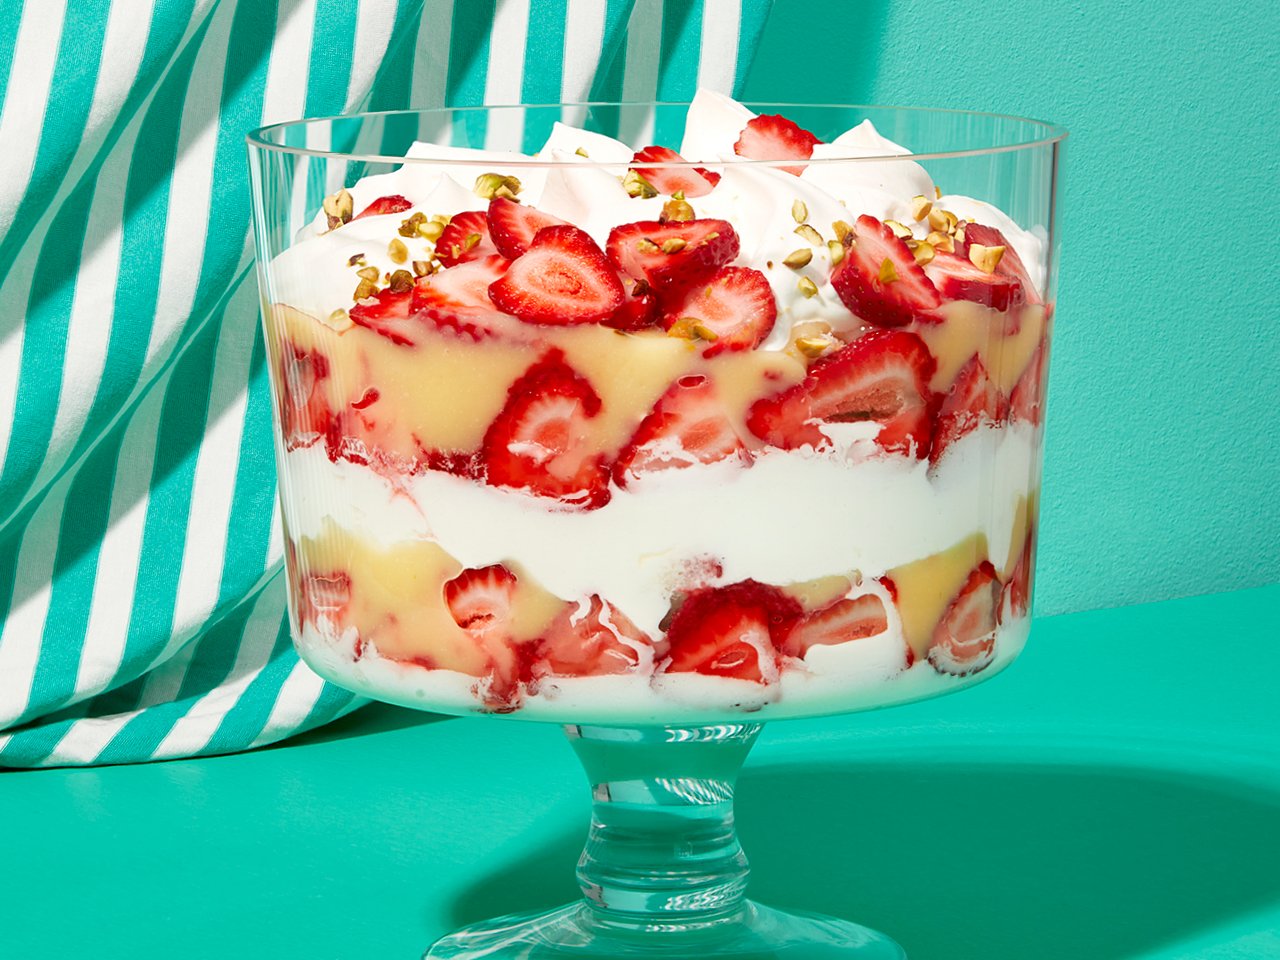 A trifle bowl showing layers of strawberry and lime curd trifle with pistachios on a turquoise table with a striped qhite and turquoise curtain in the background